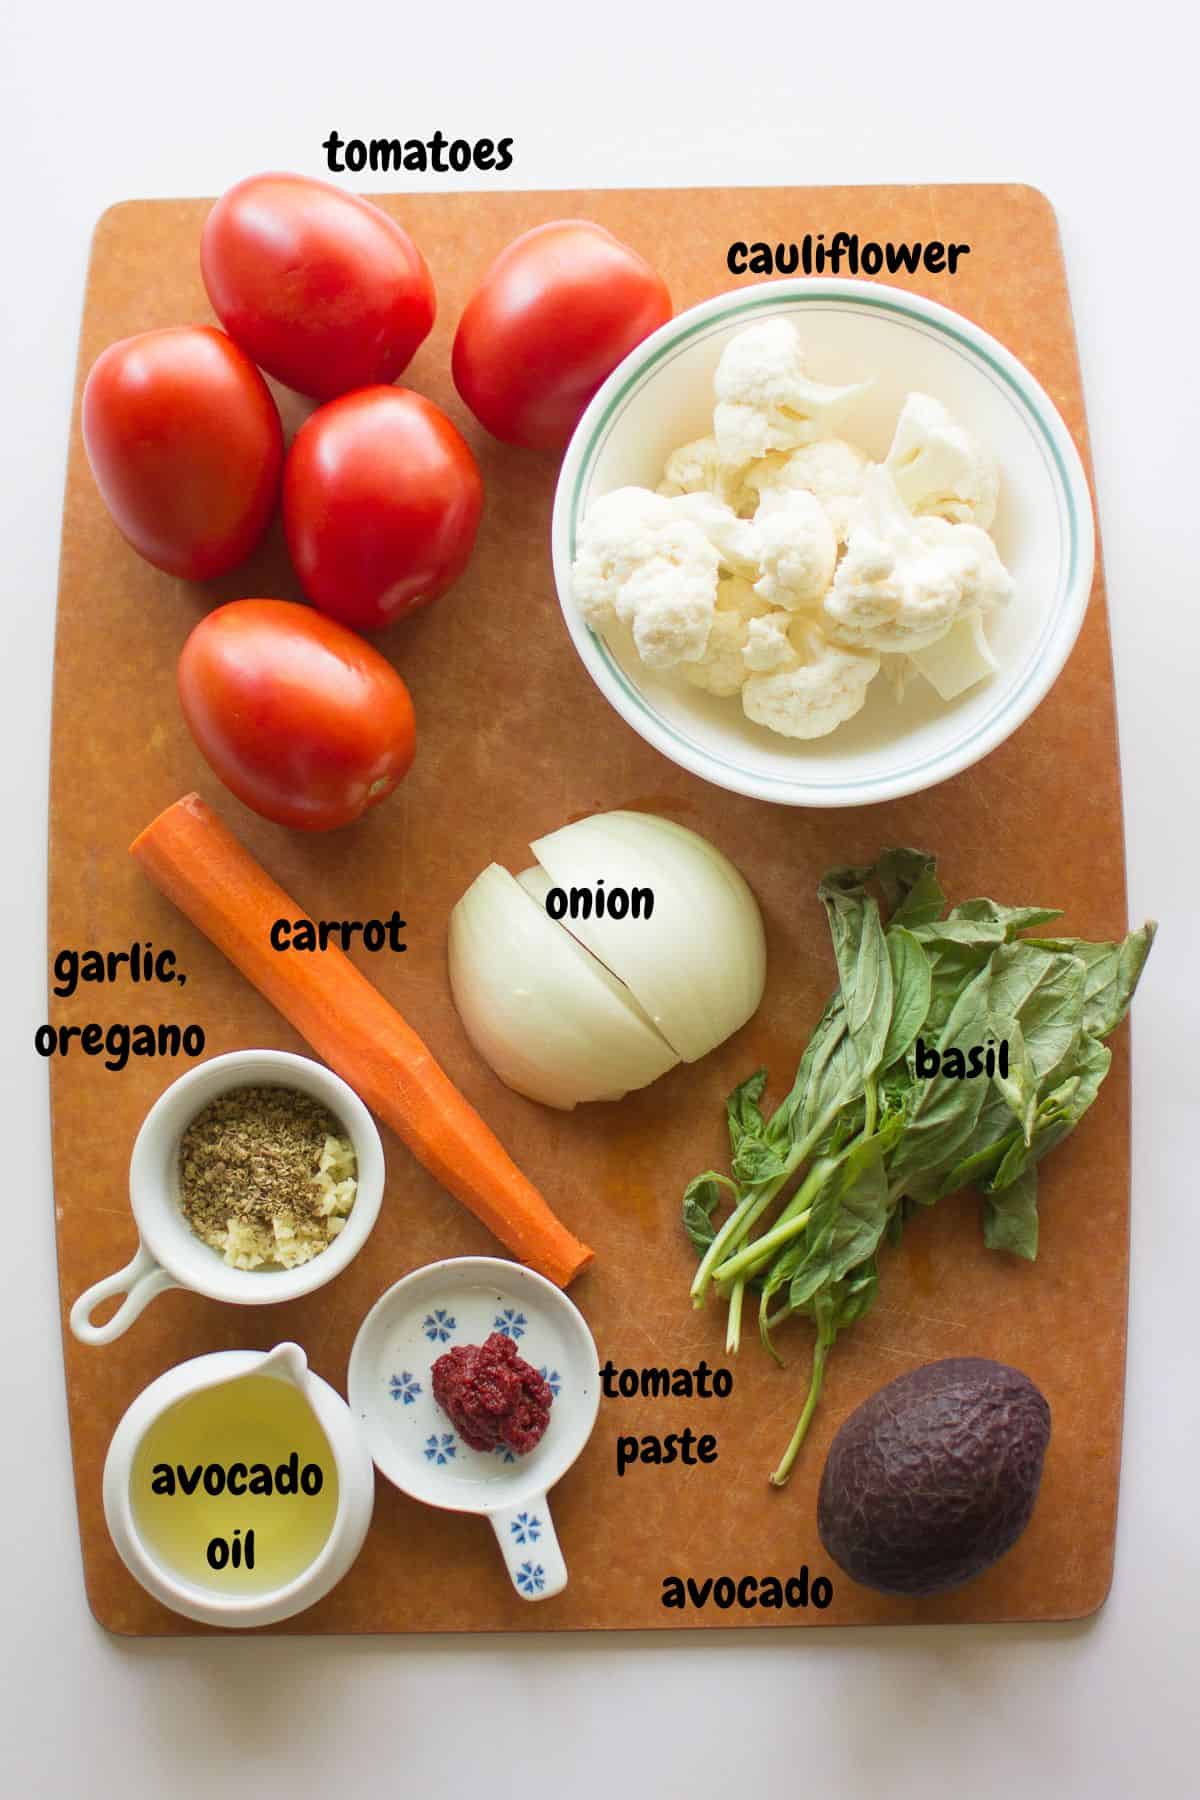 All the ingredients laid out on a wooden board.